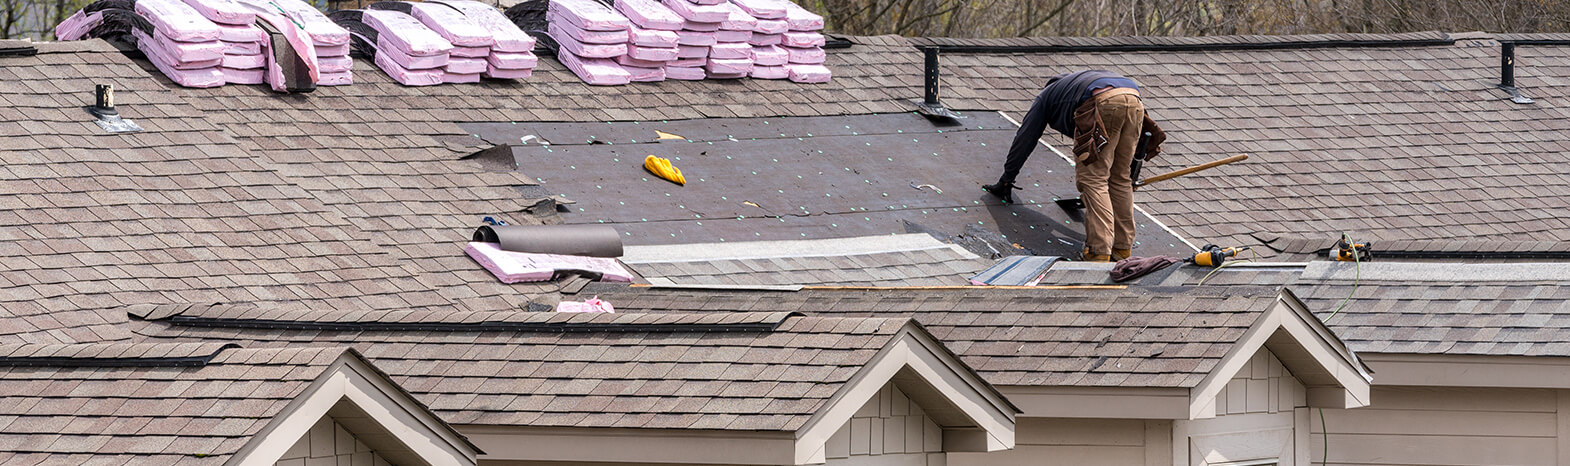 Lapeer Roofing Contractor, General Contractor and Carpenter